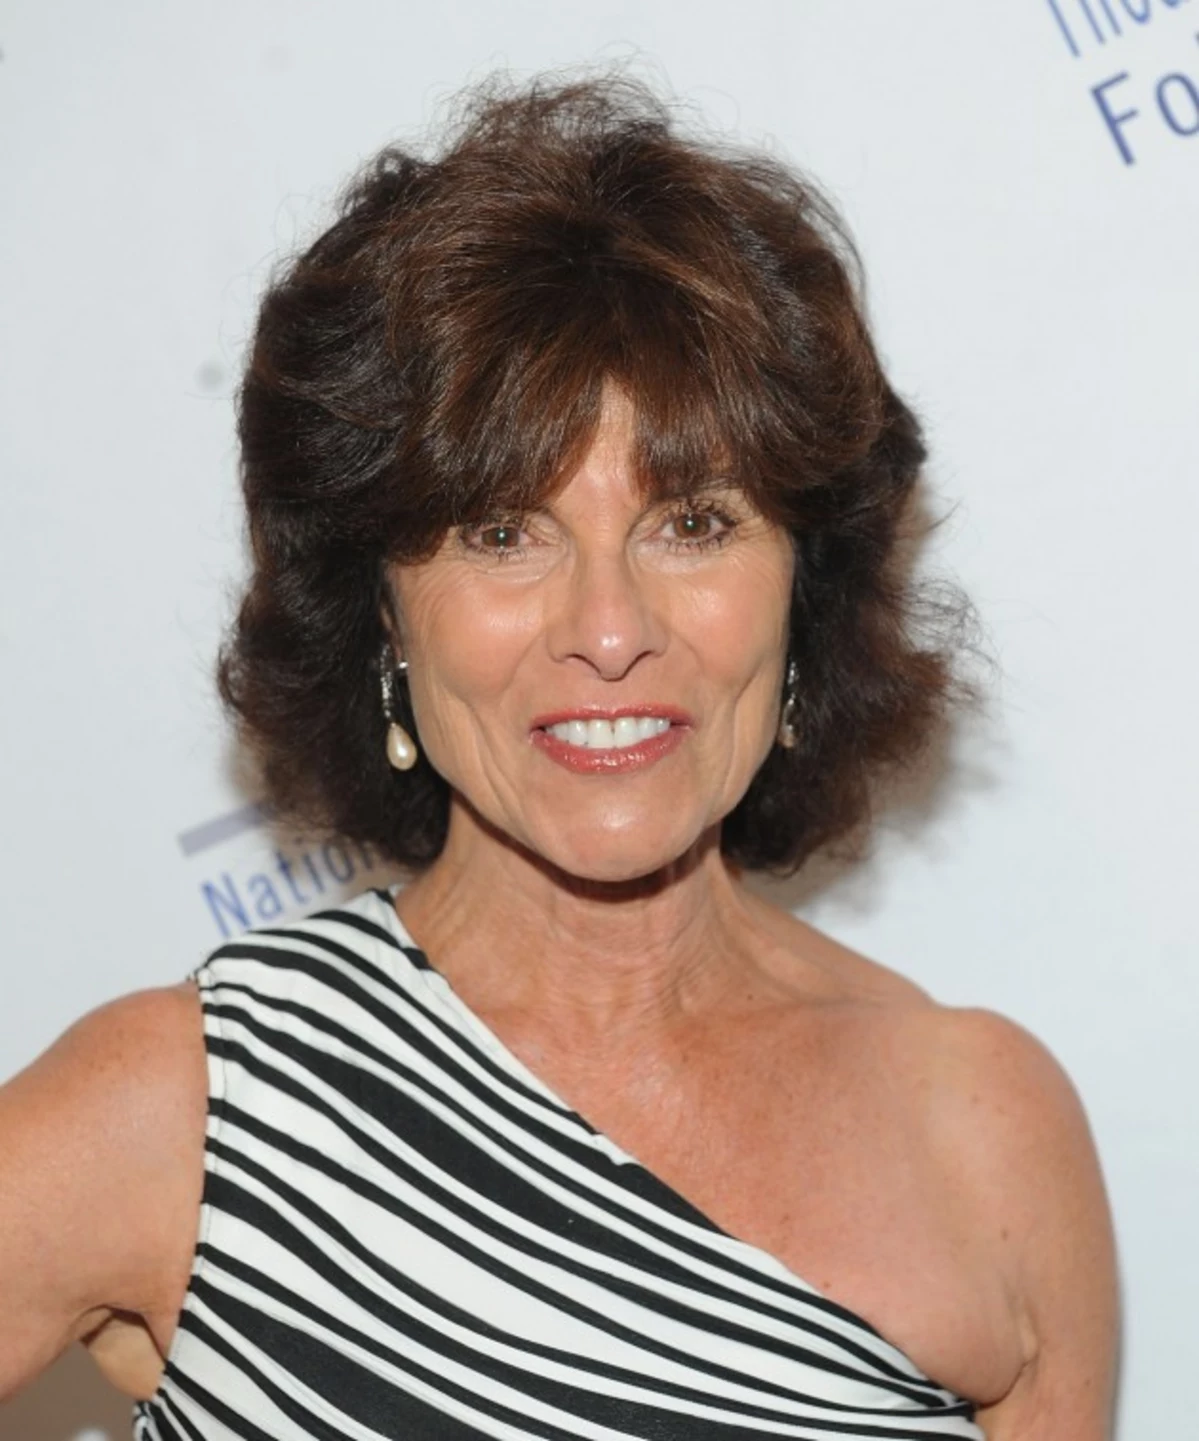 'Swamp Thing's" Adrienne Barbeau is Approaching 70